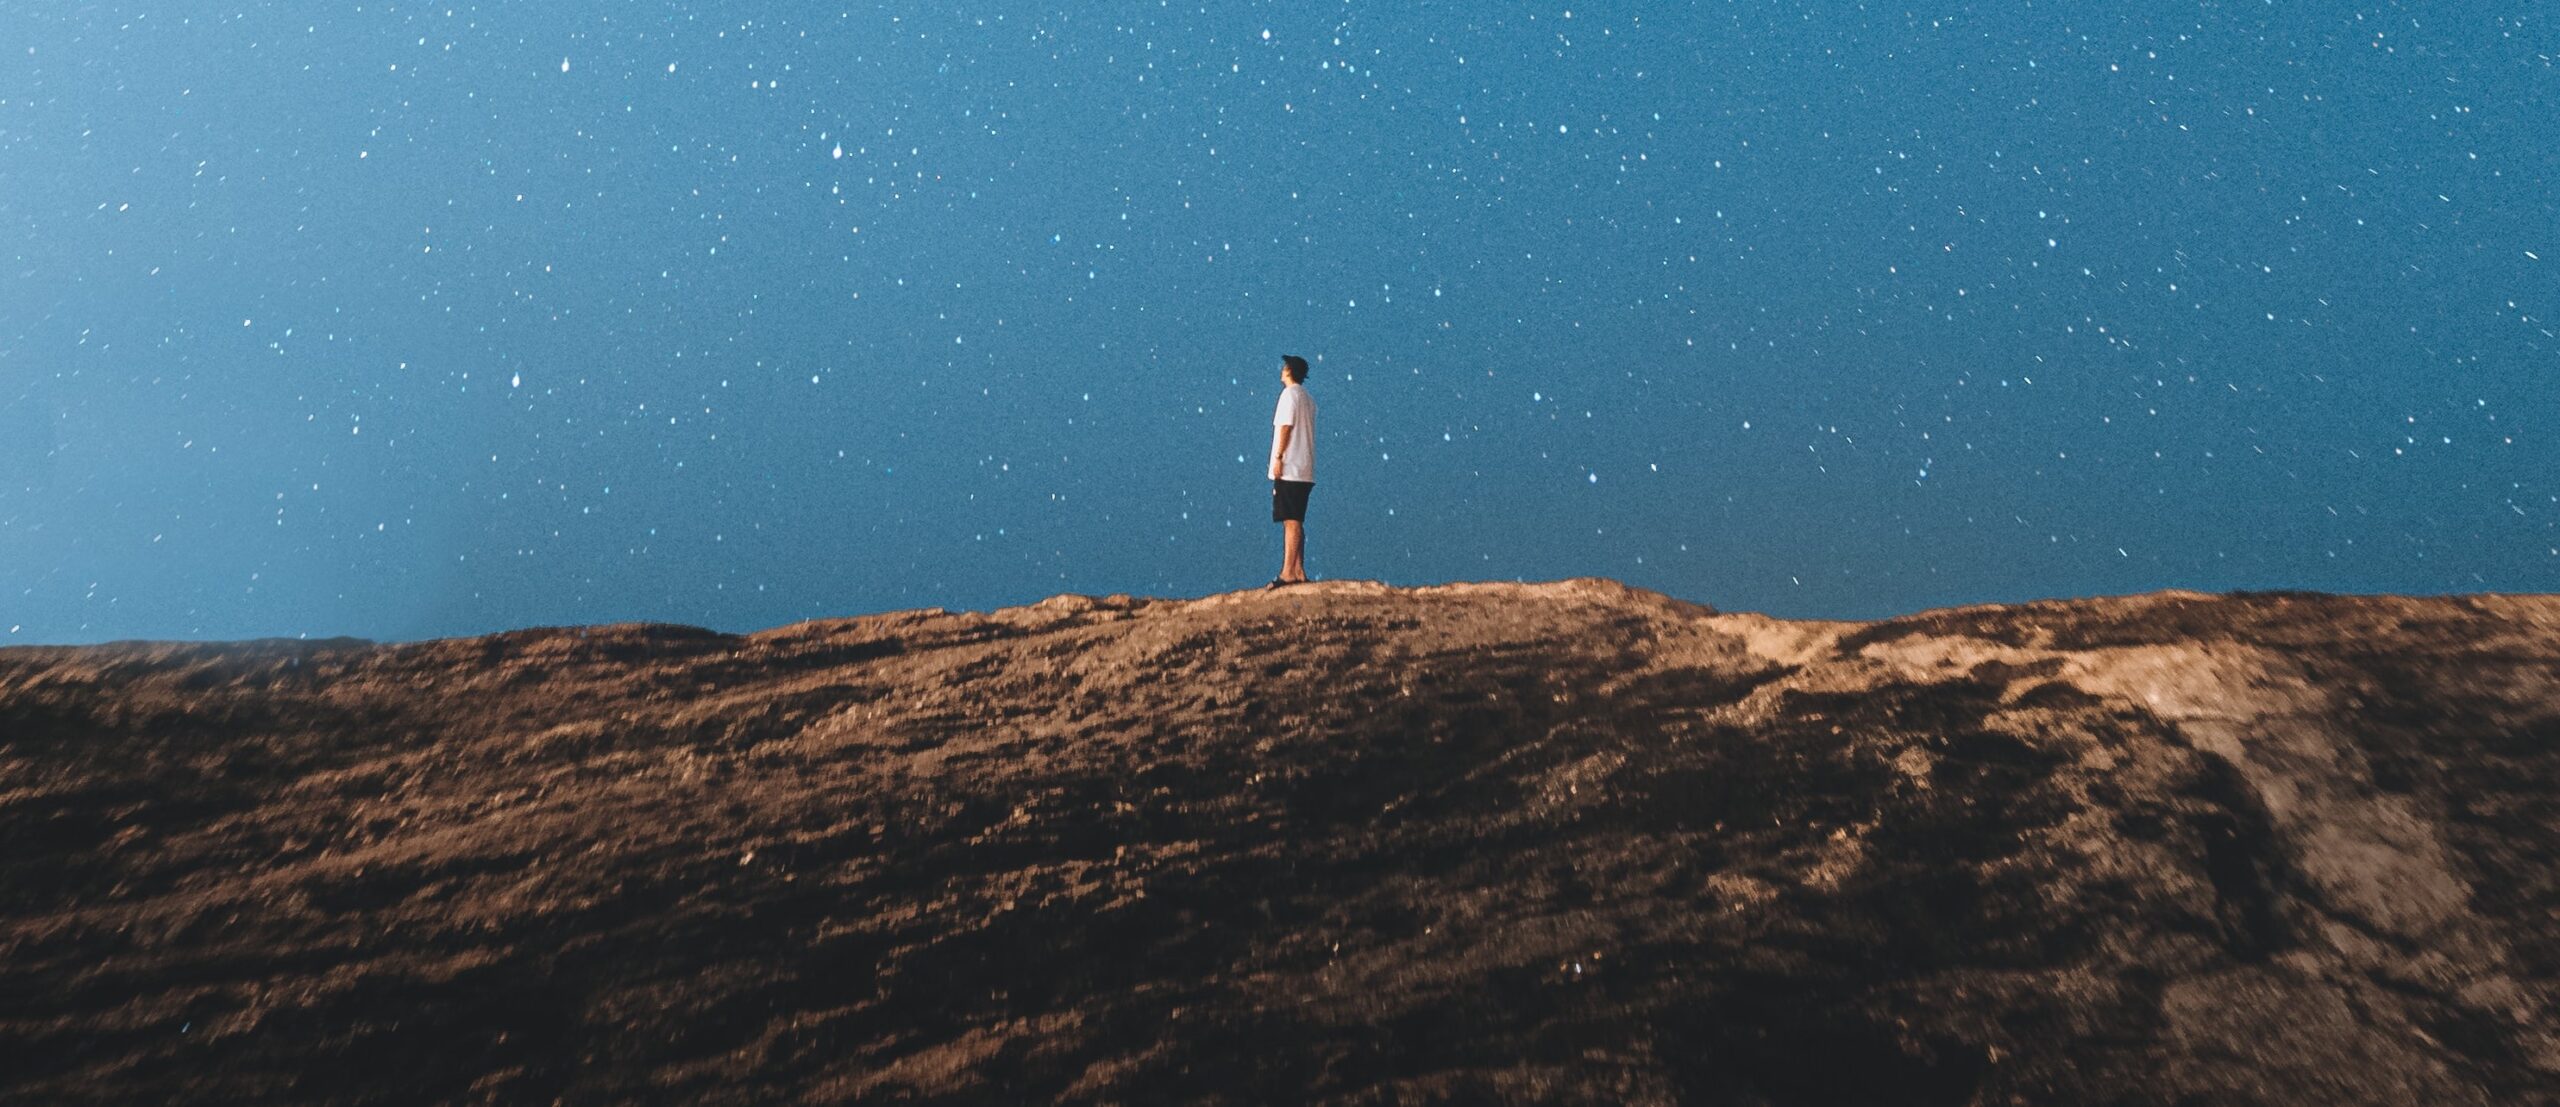 person standing small on rocky land beneath blue sky full of stars